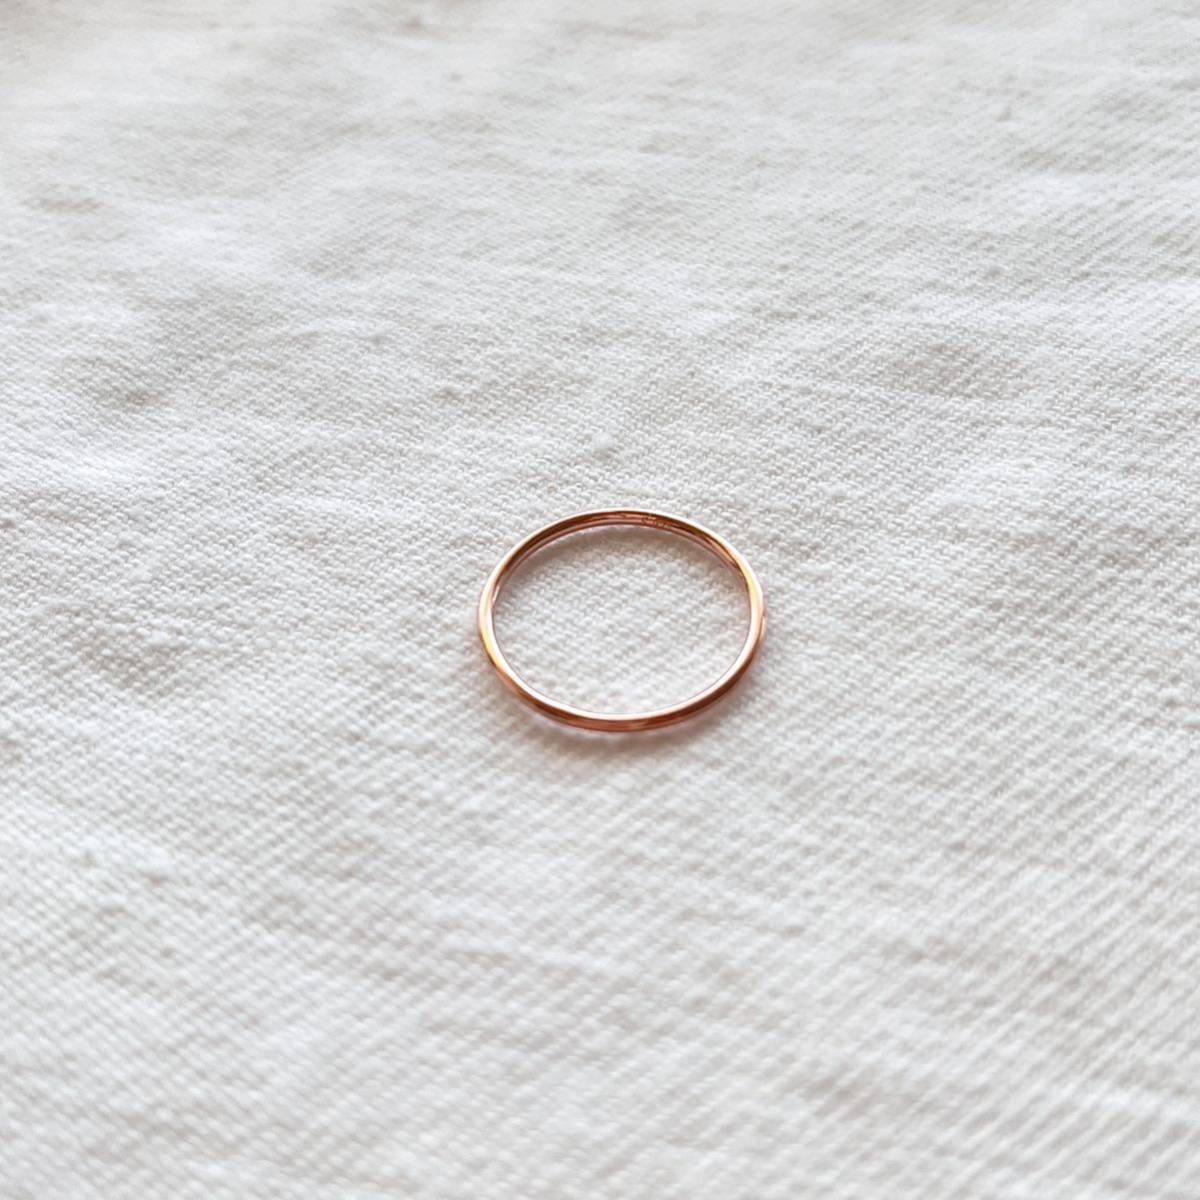  ring silver 925 lady's plain ring pink gold approximately 10 number width approximately 1mm ring ring sv925 simple thin original silver silver 